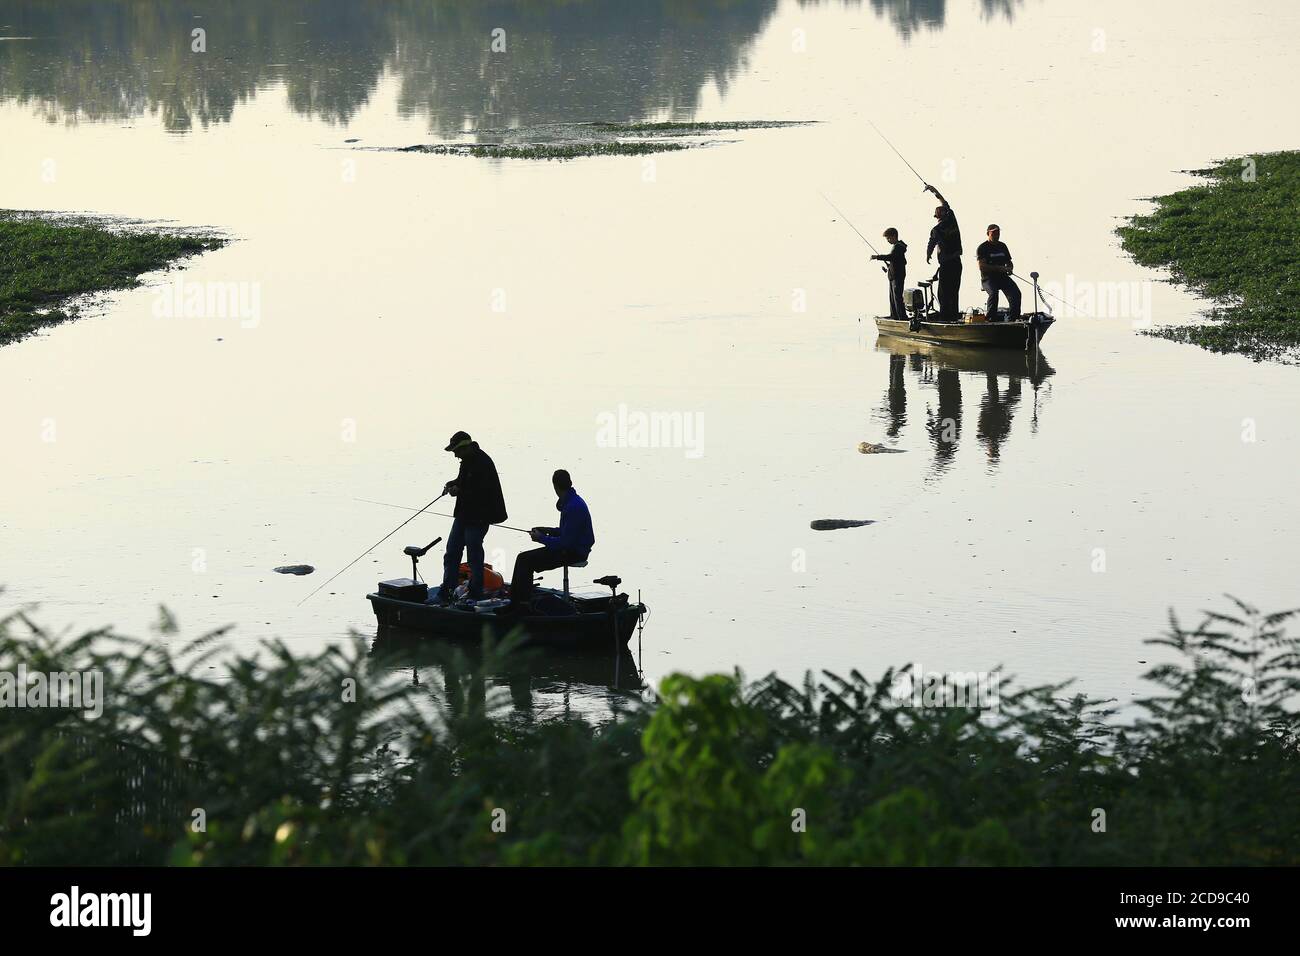 France, Vaucluse, Caderousse, fishermen on the lone upstream of the Caderousse Dam Stock Photo